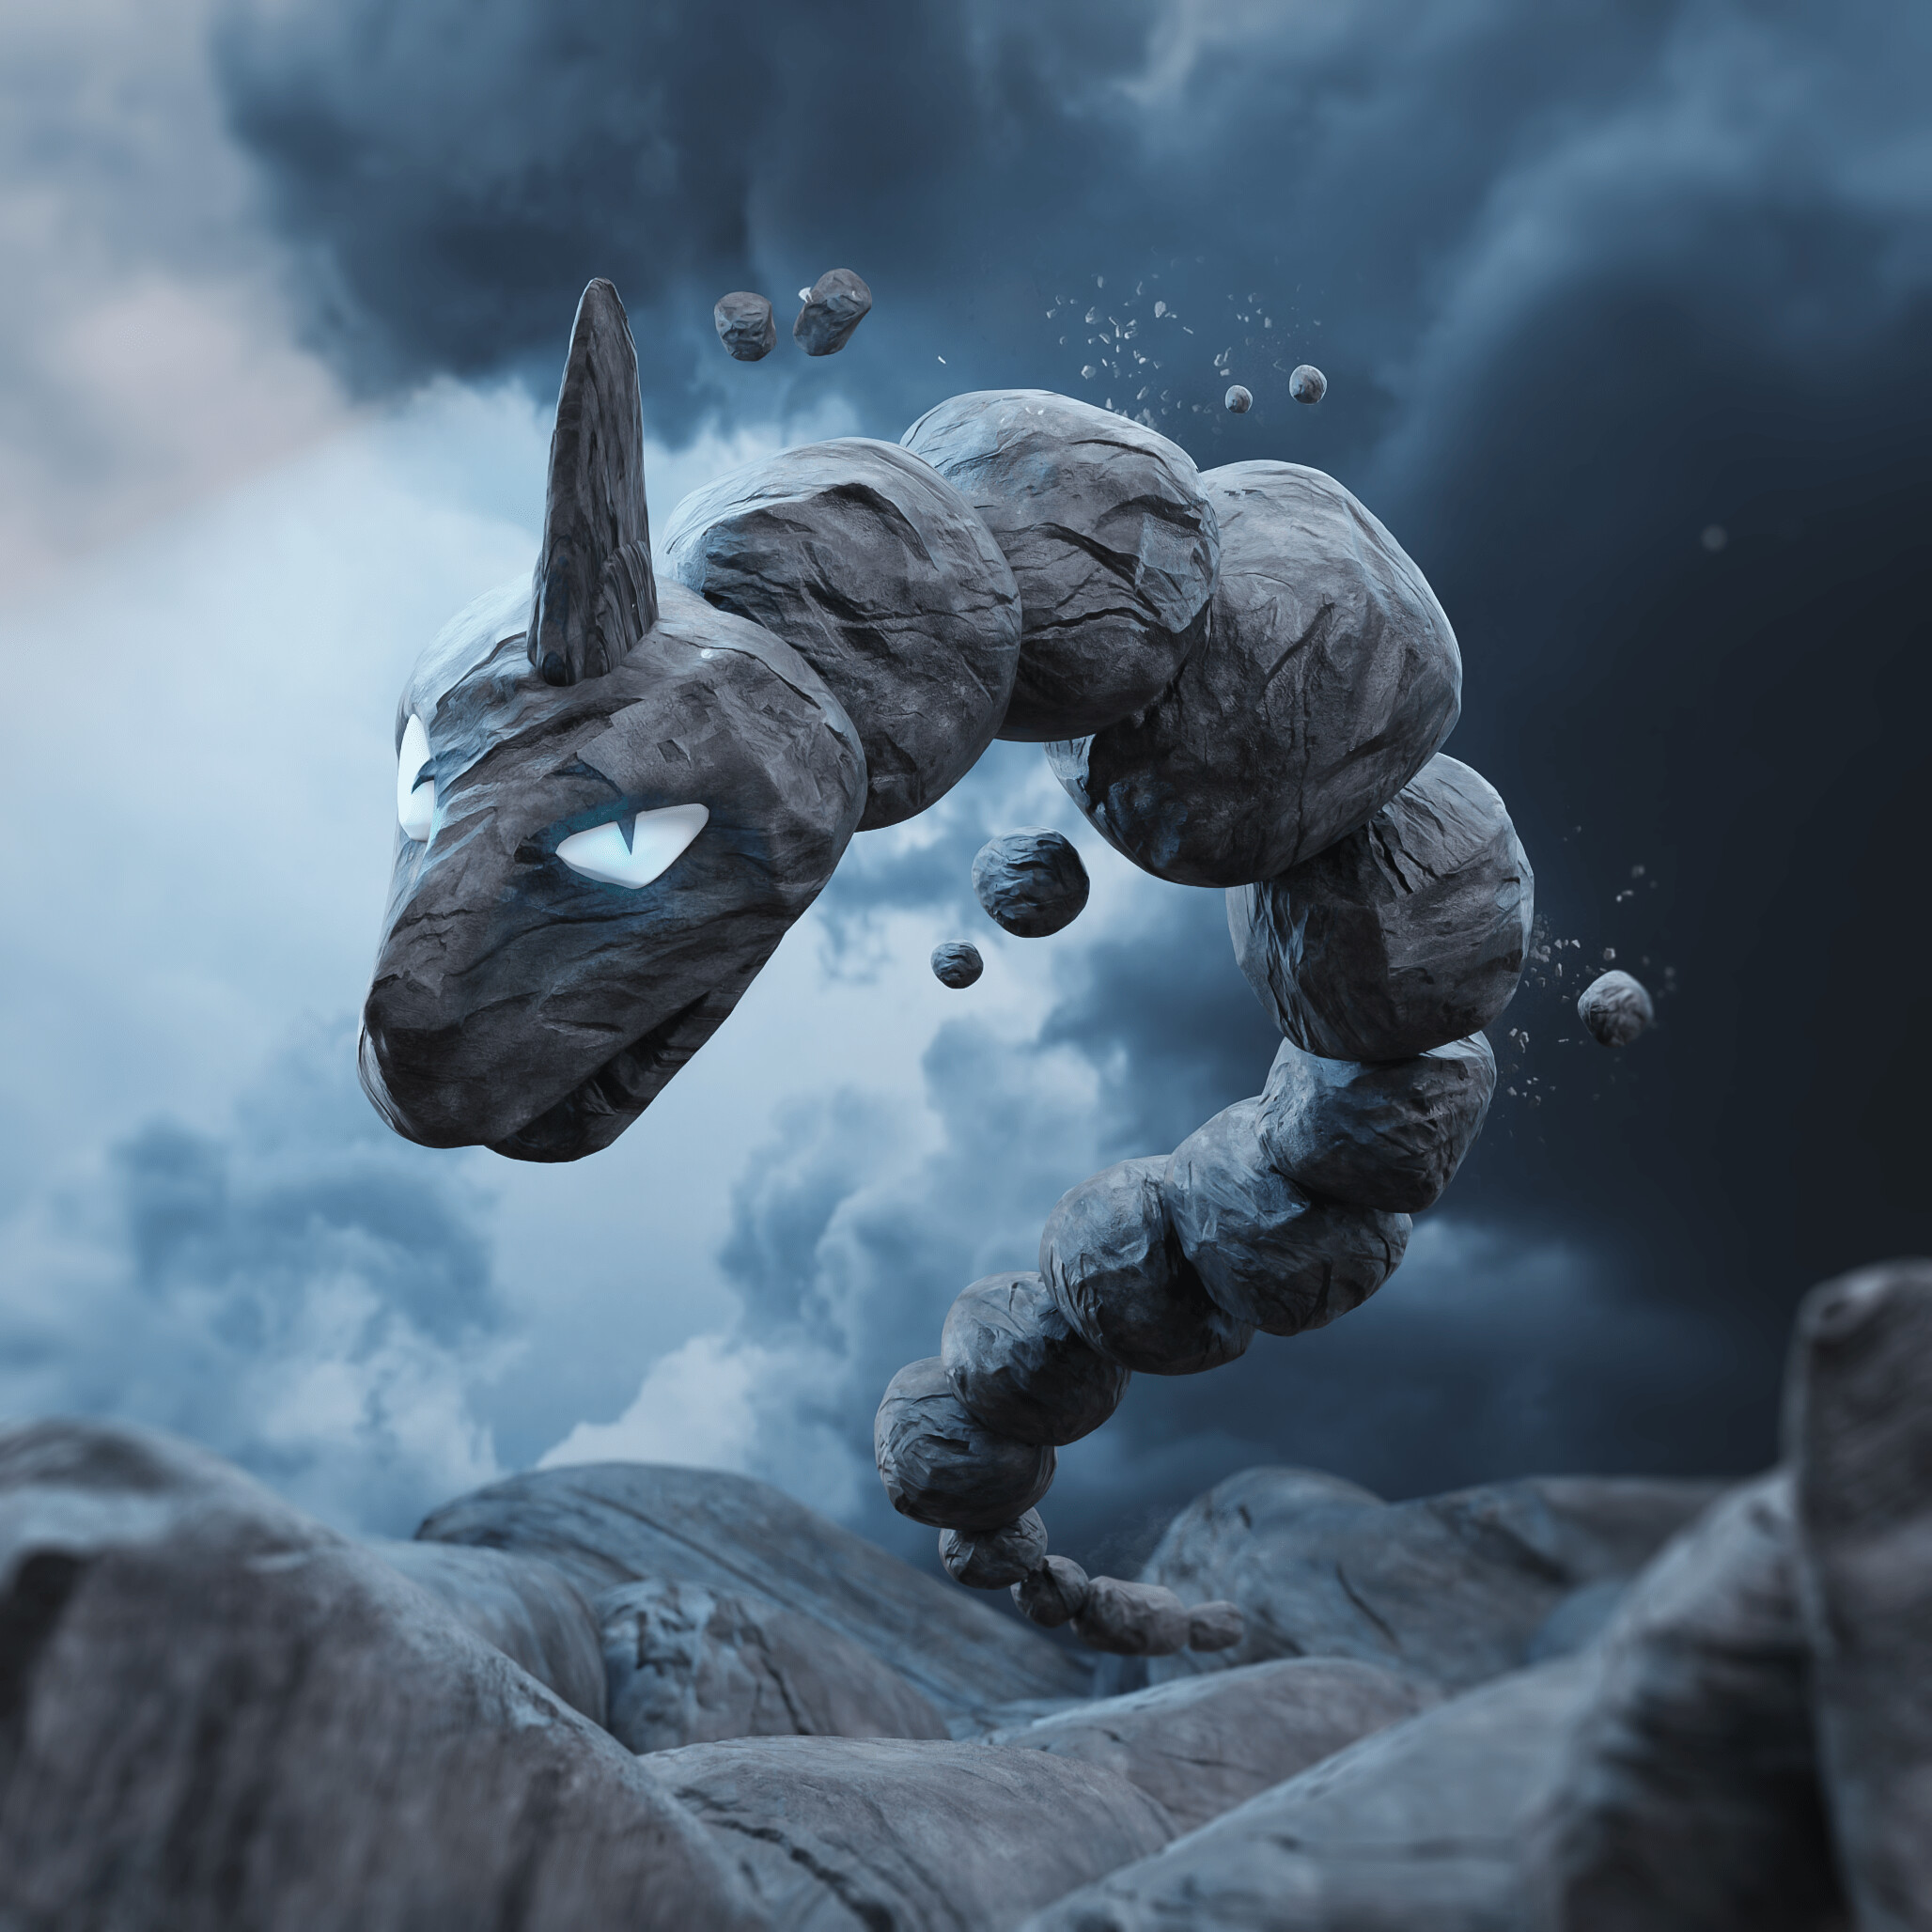 My version of Onix, how do you like this #Pokemon? - Finished Projects -  Blender Artists Community